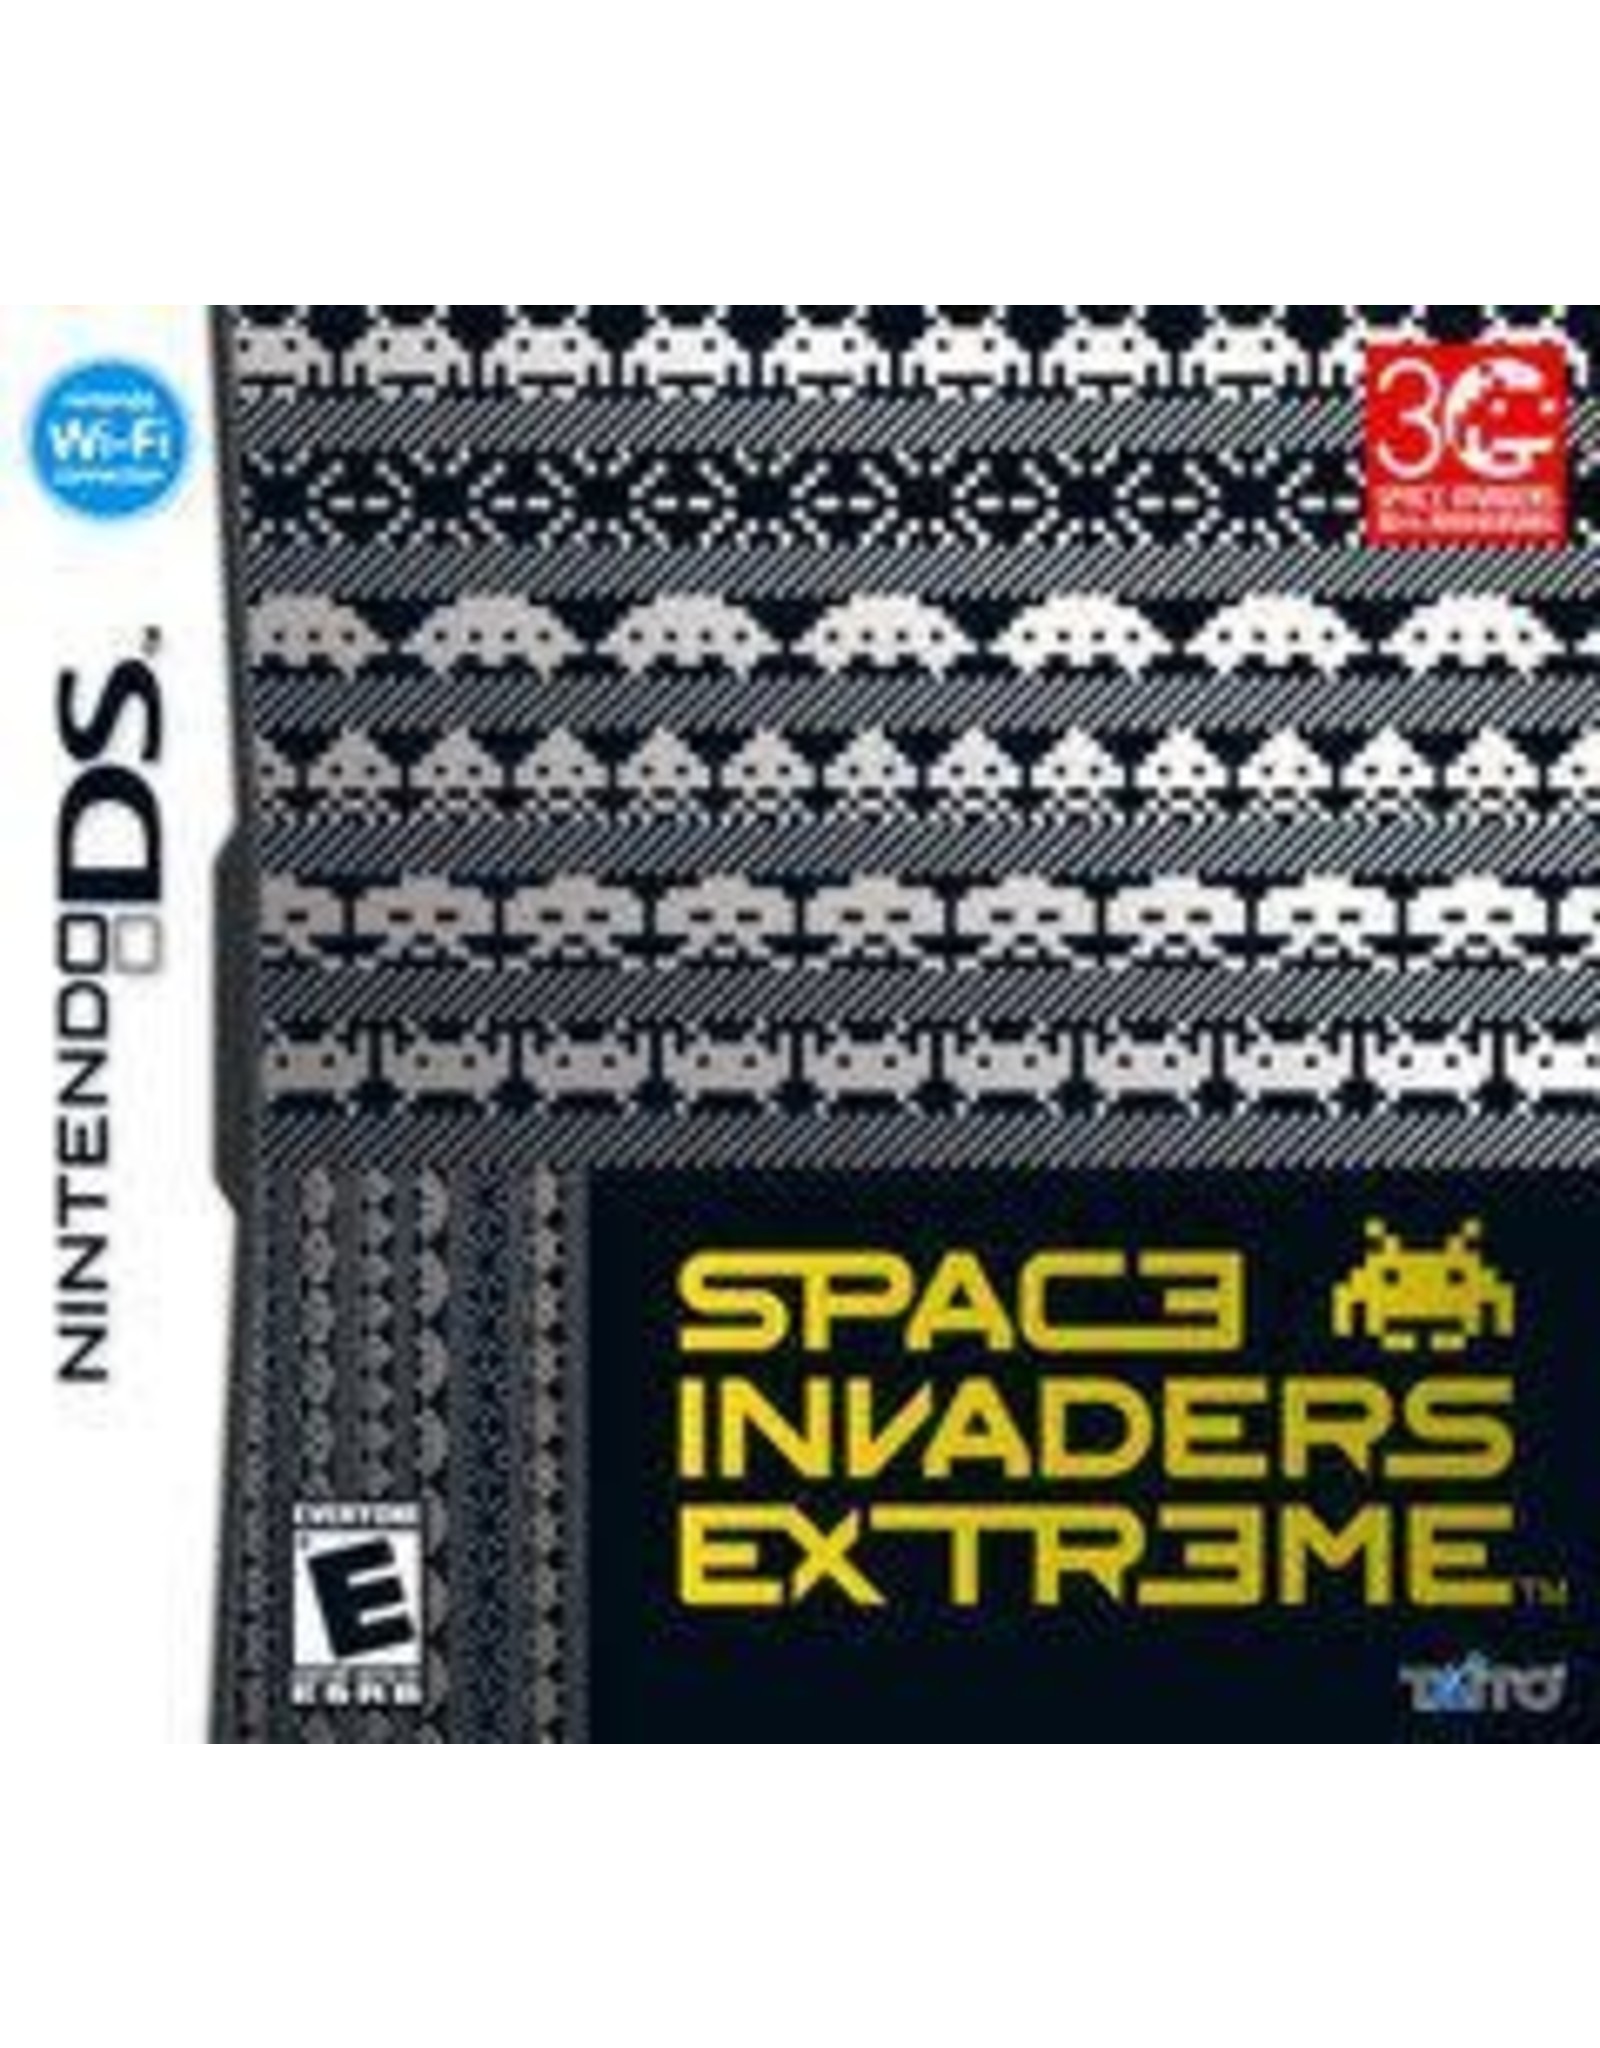 Nintendo DS Space Invaders Extreme (Cart Only)